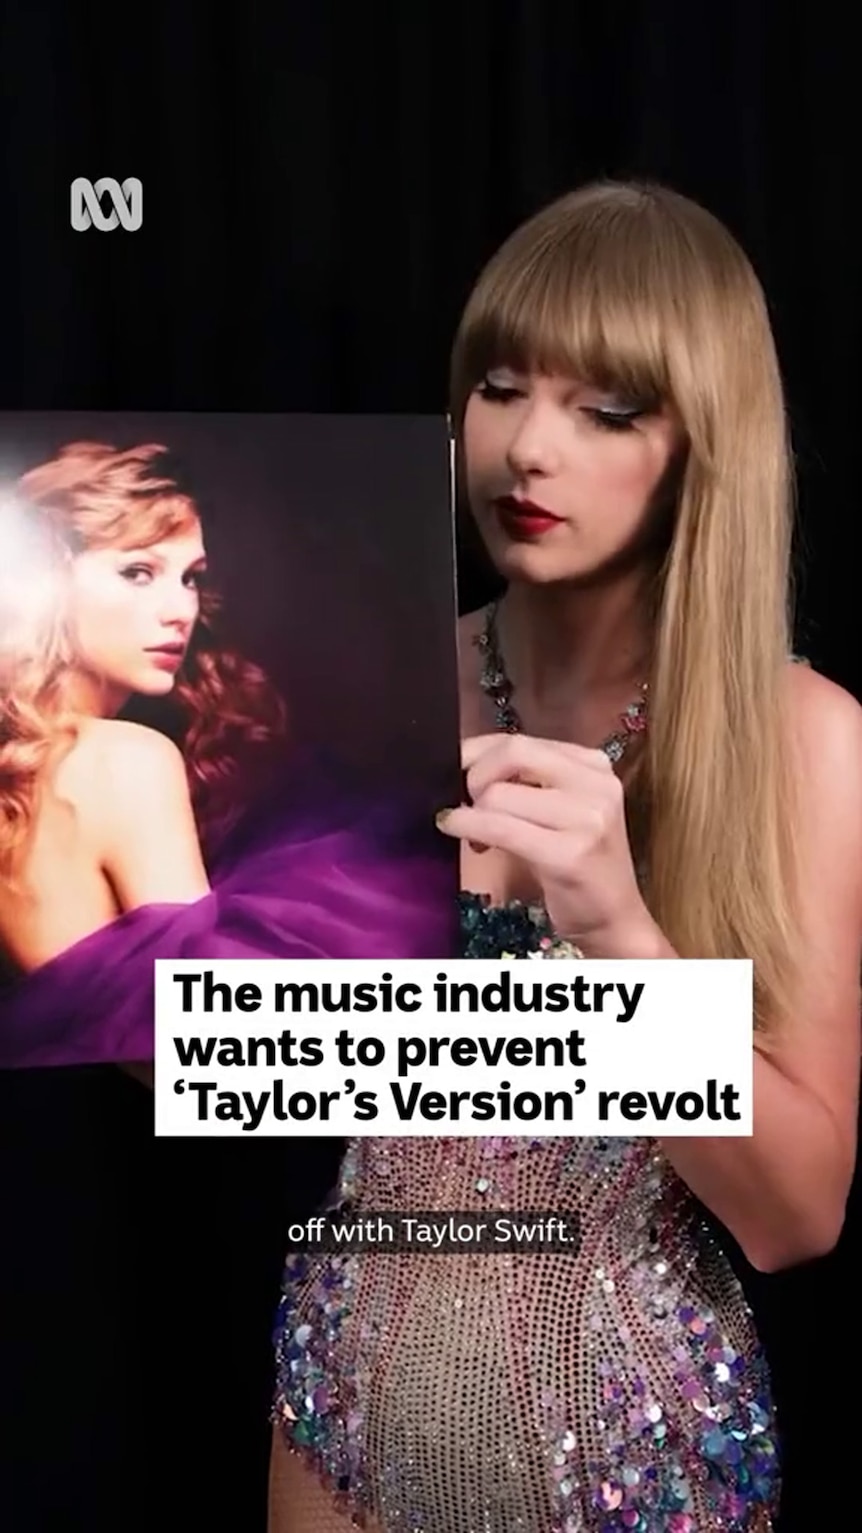 Taylor Swift stands in front of a black background holding a record featuring a photograph of her on the cover 